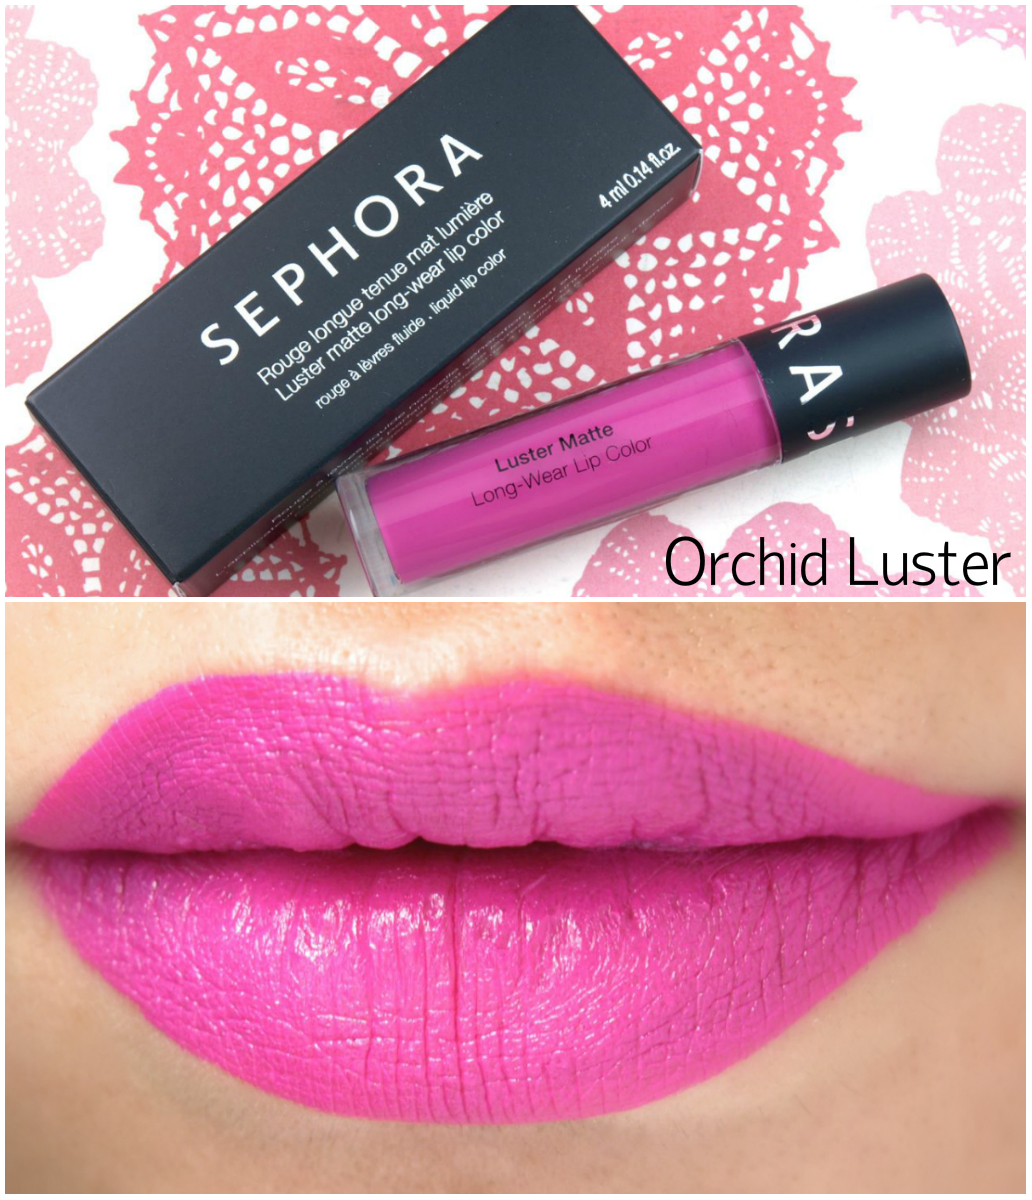 Sephora Luster Matte Long-wear Lip Color in "Orchid Luster": Review and Swatches